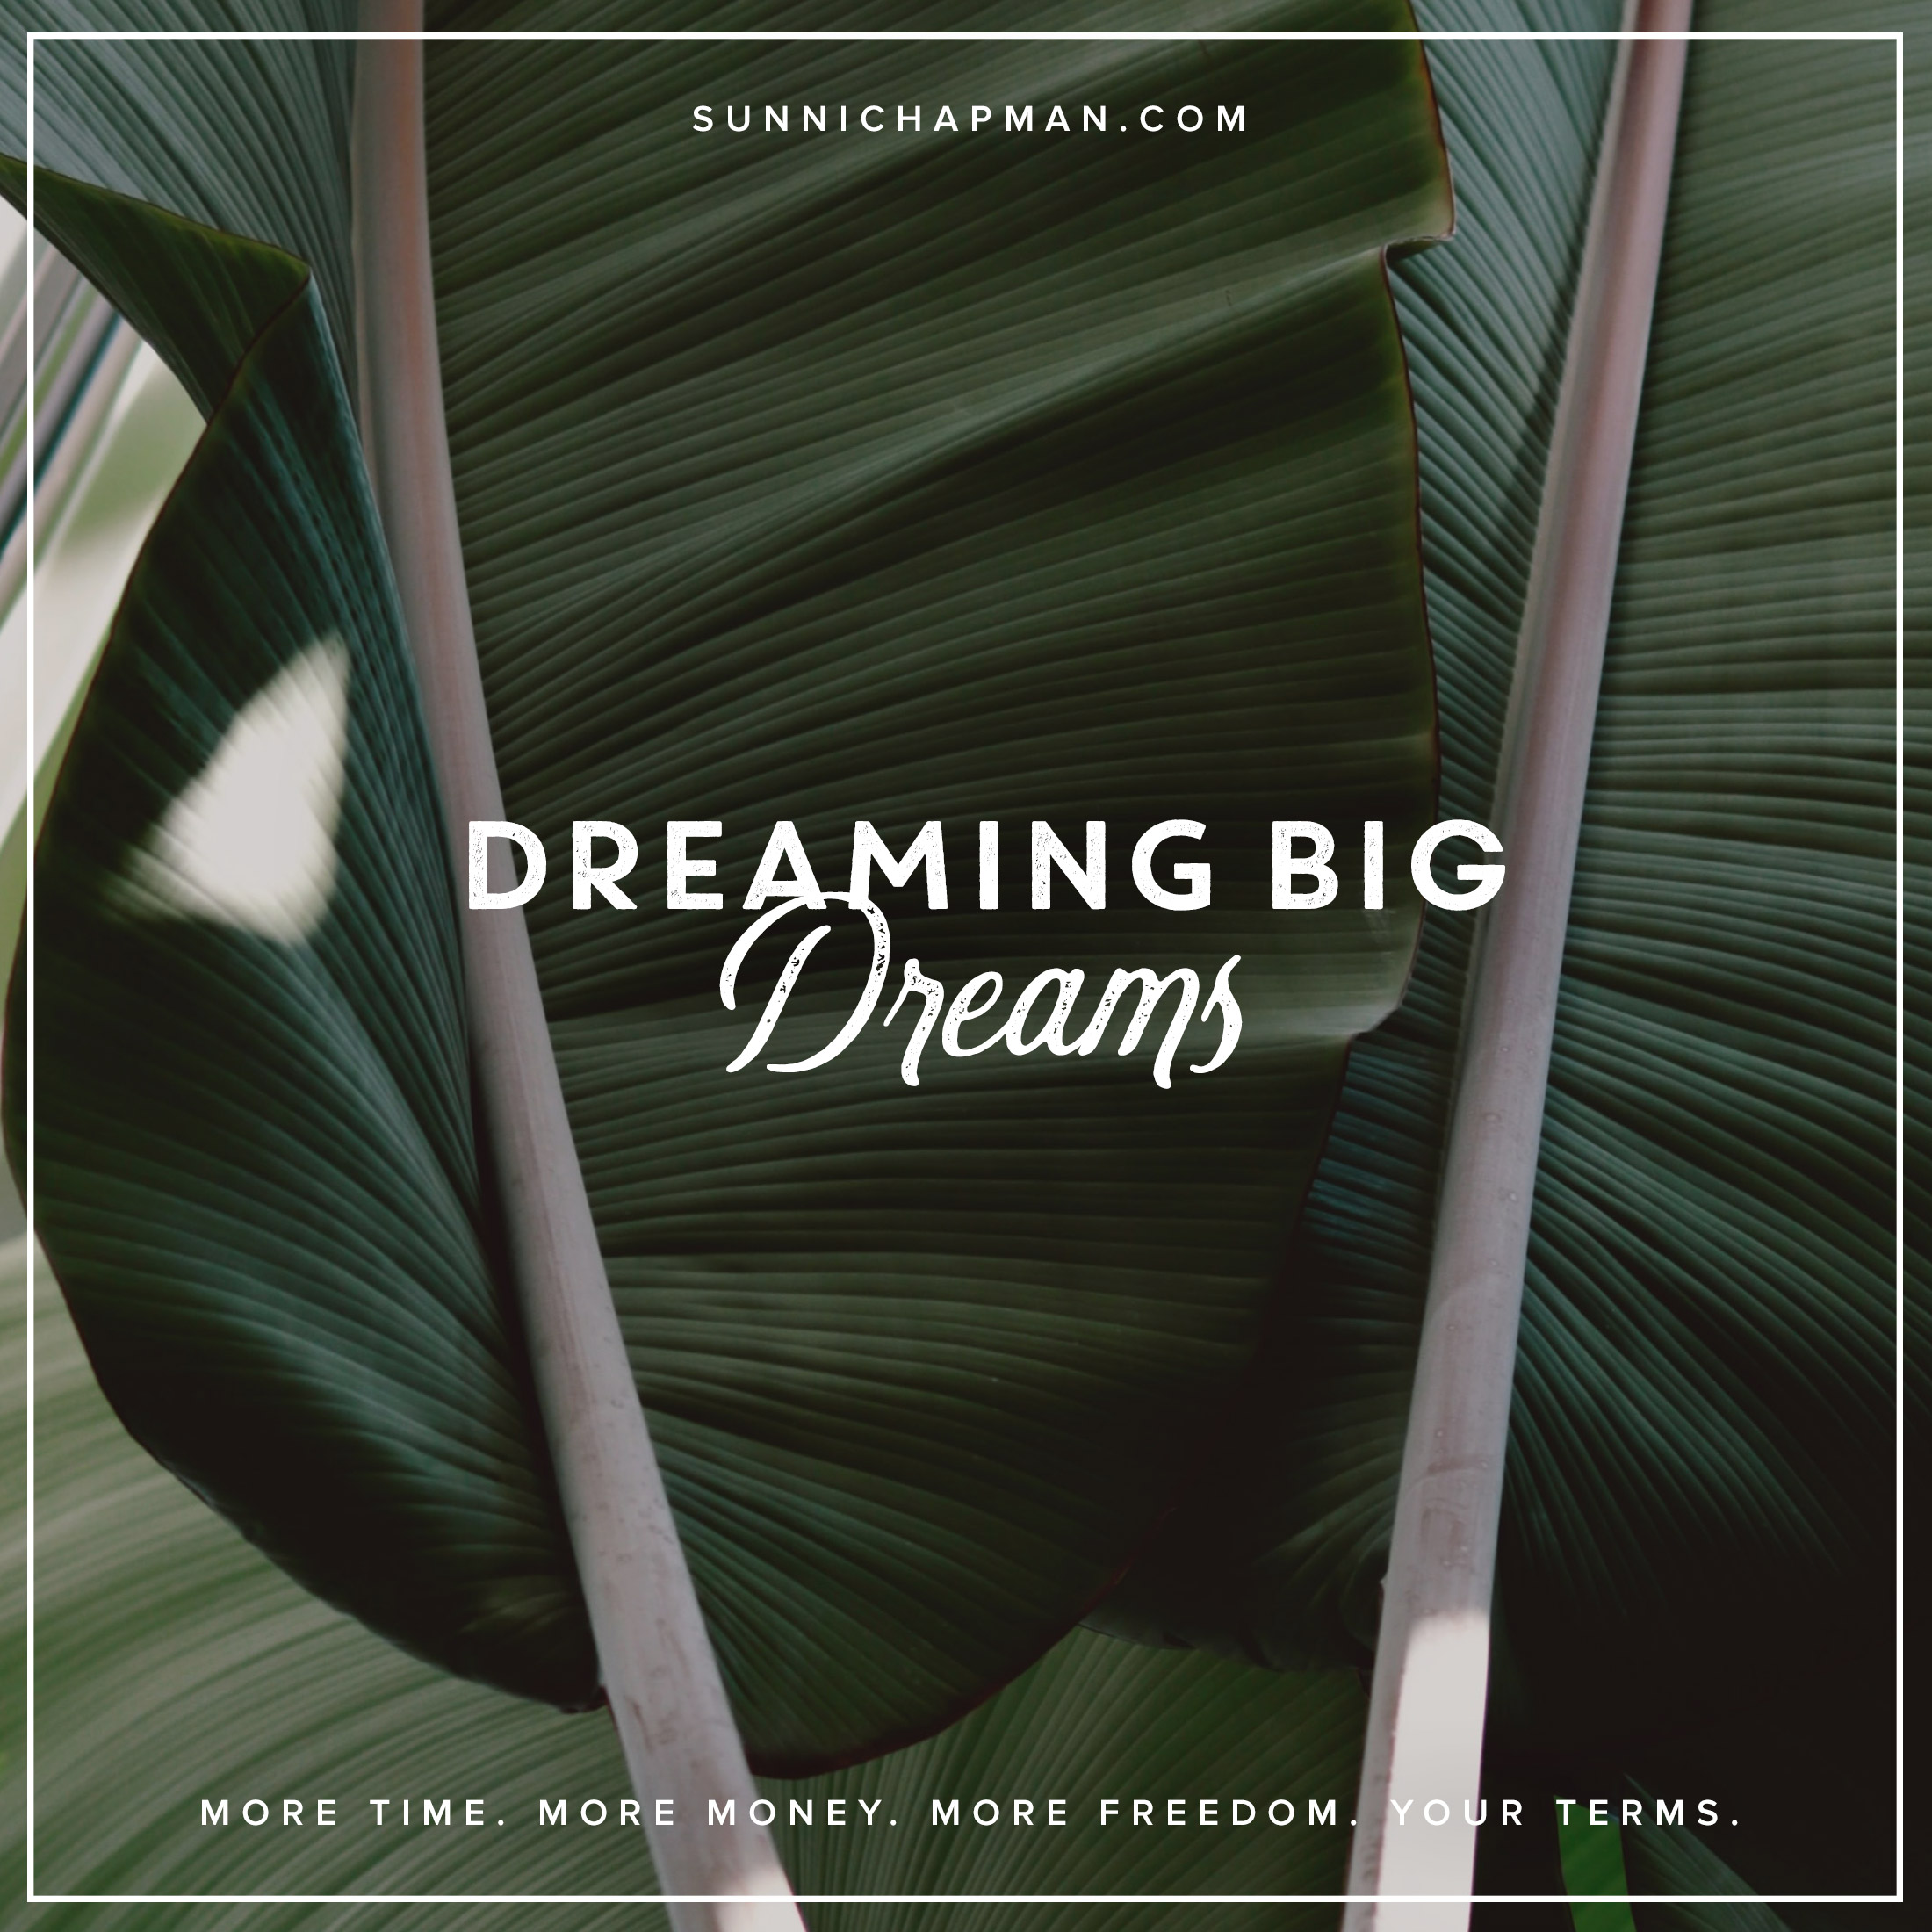 Large leaves of a tropical plant, and text: Dreaming Big Dreams